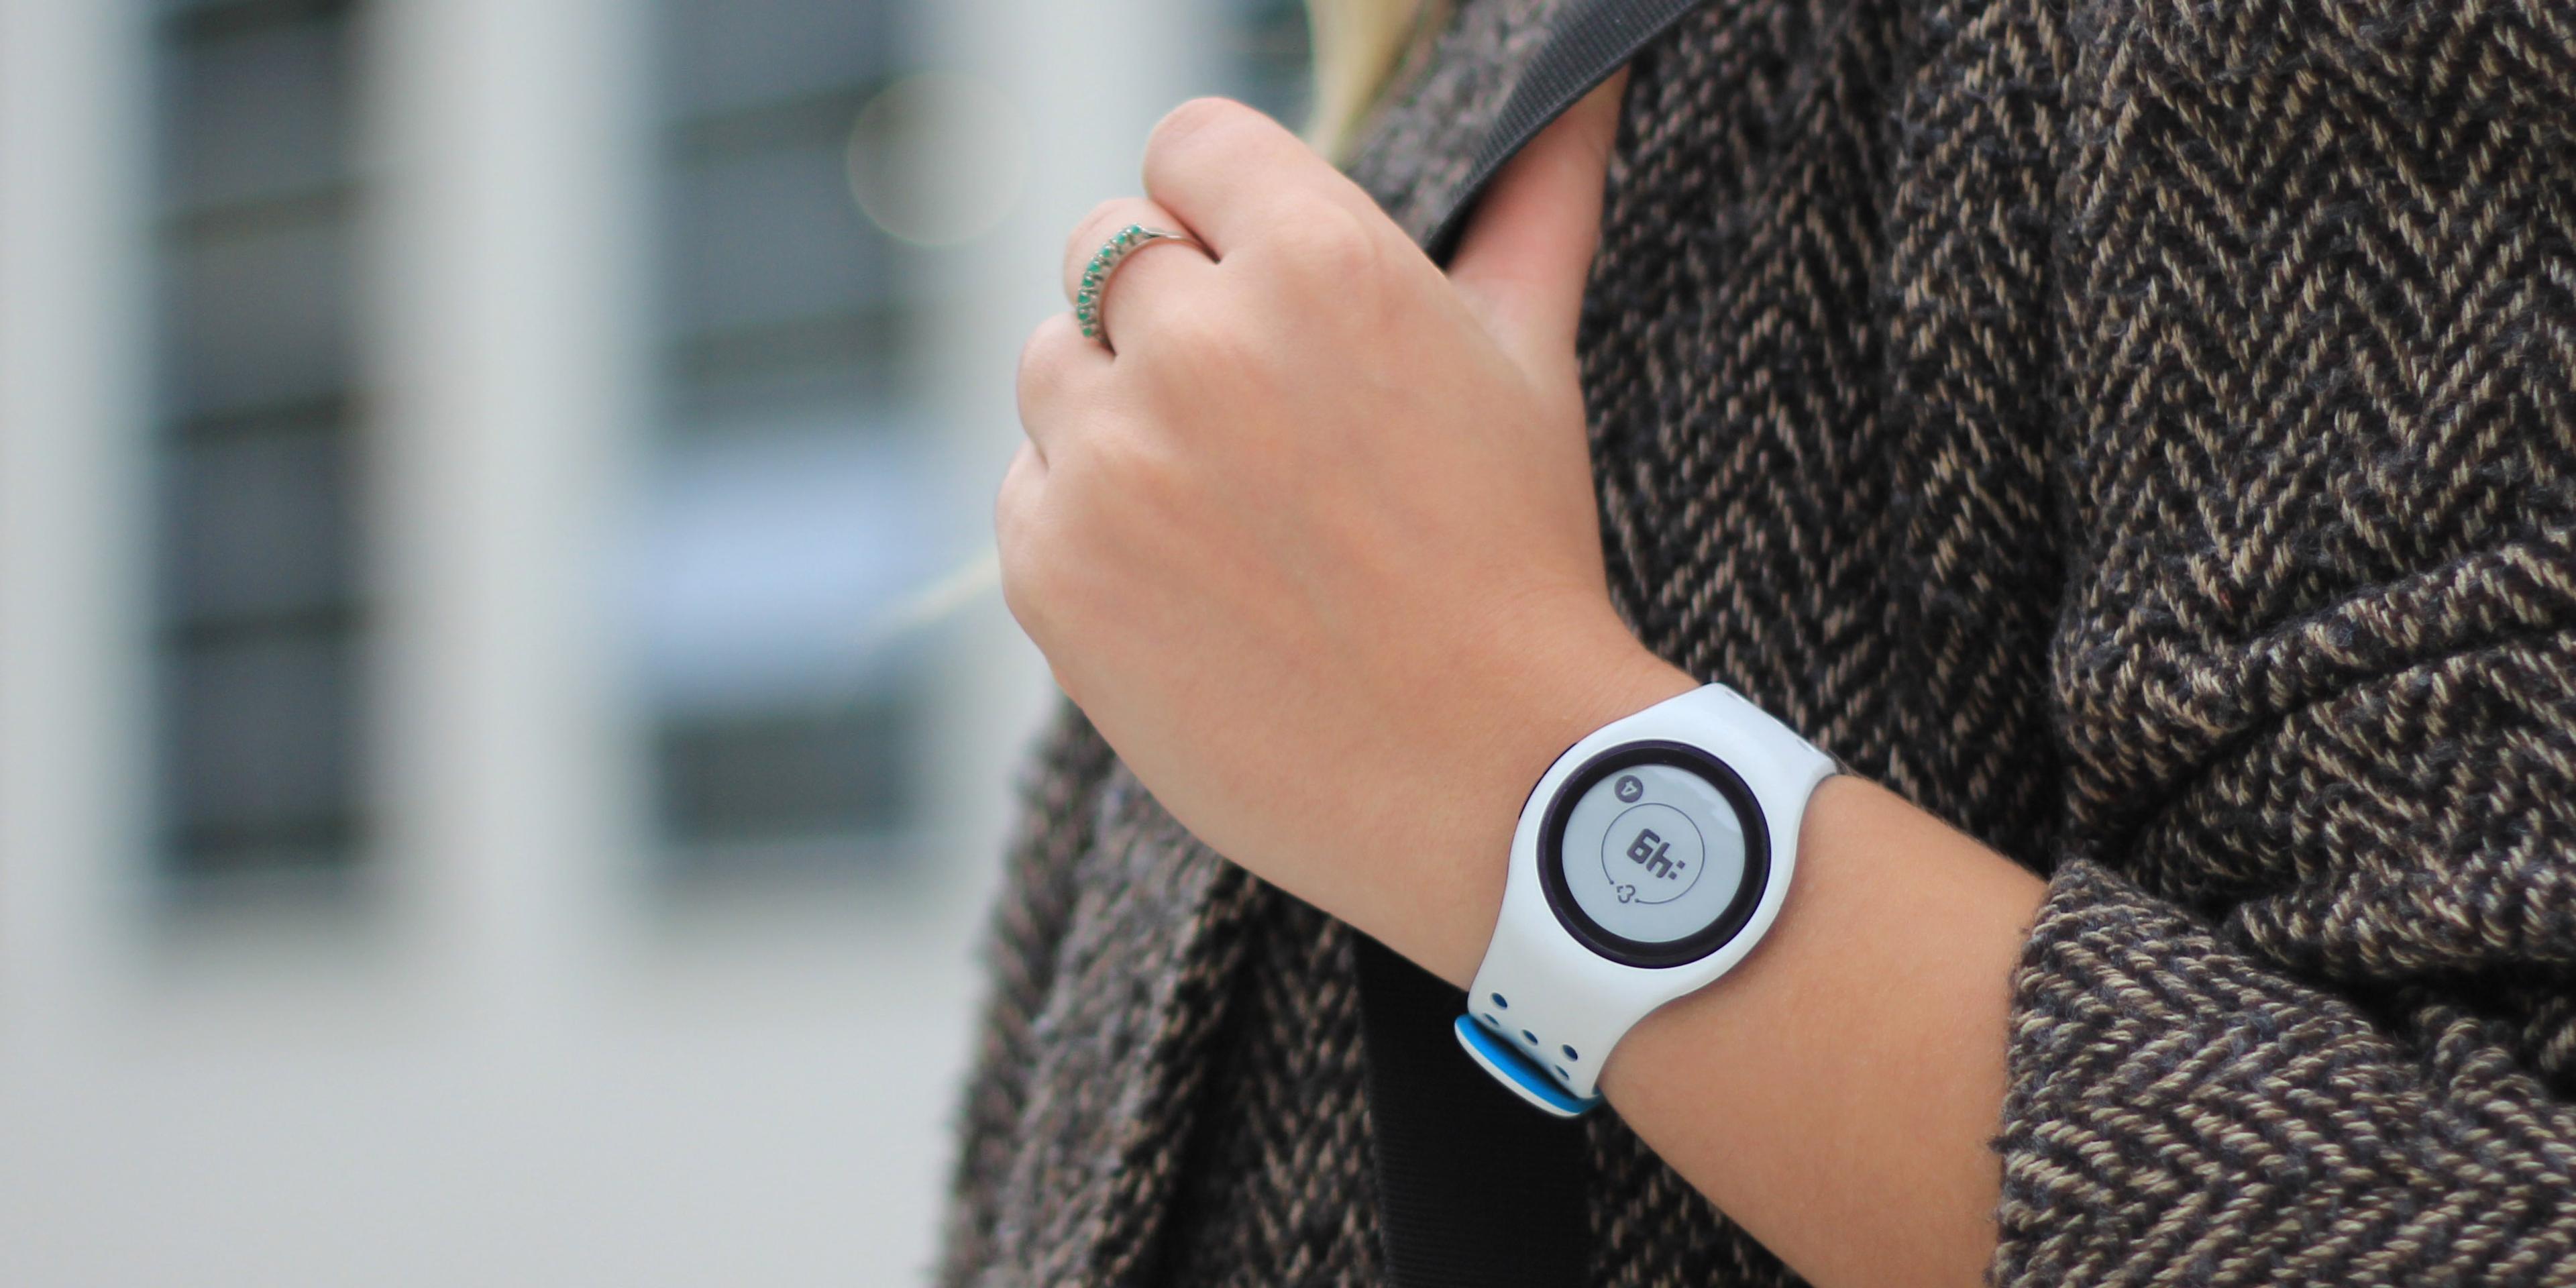 the-embraceplus-wearable-wins-european-ce-mark-cover-image